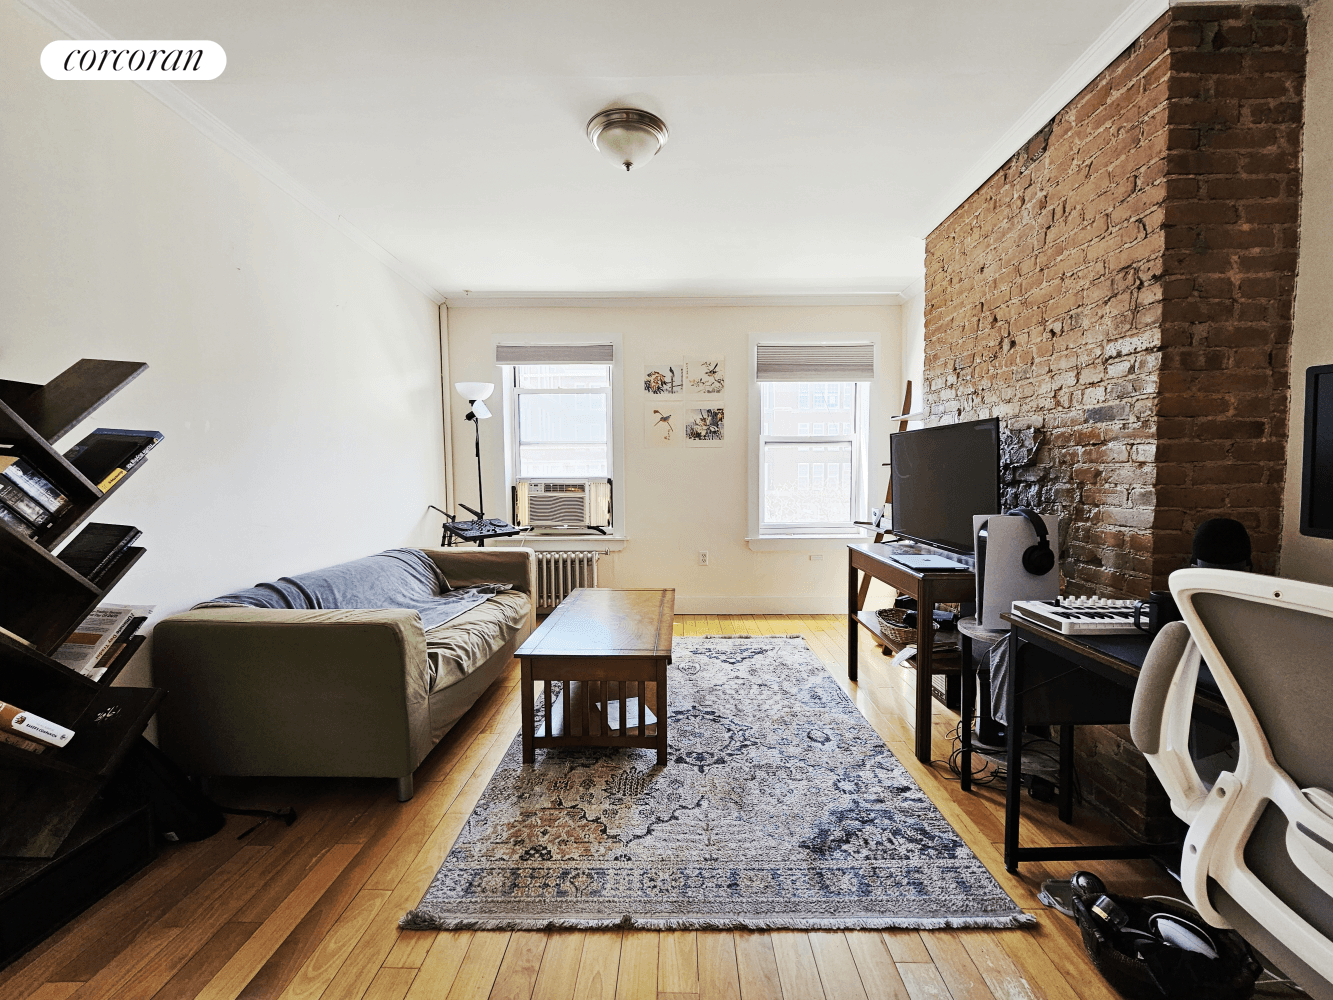 Charming convertible 2 bedroom home situation in the heart of South Slope.